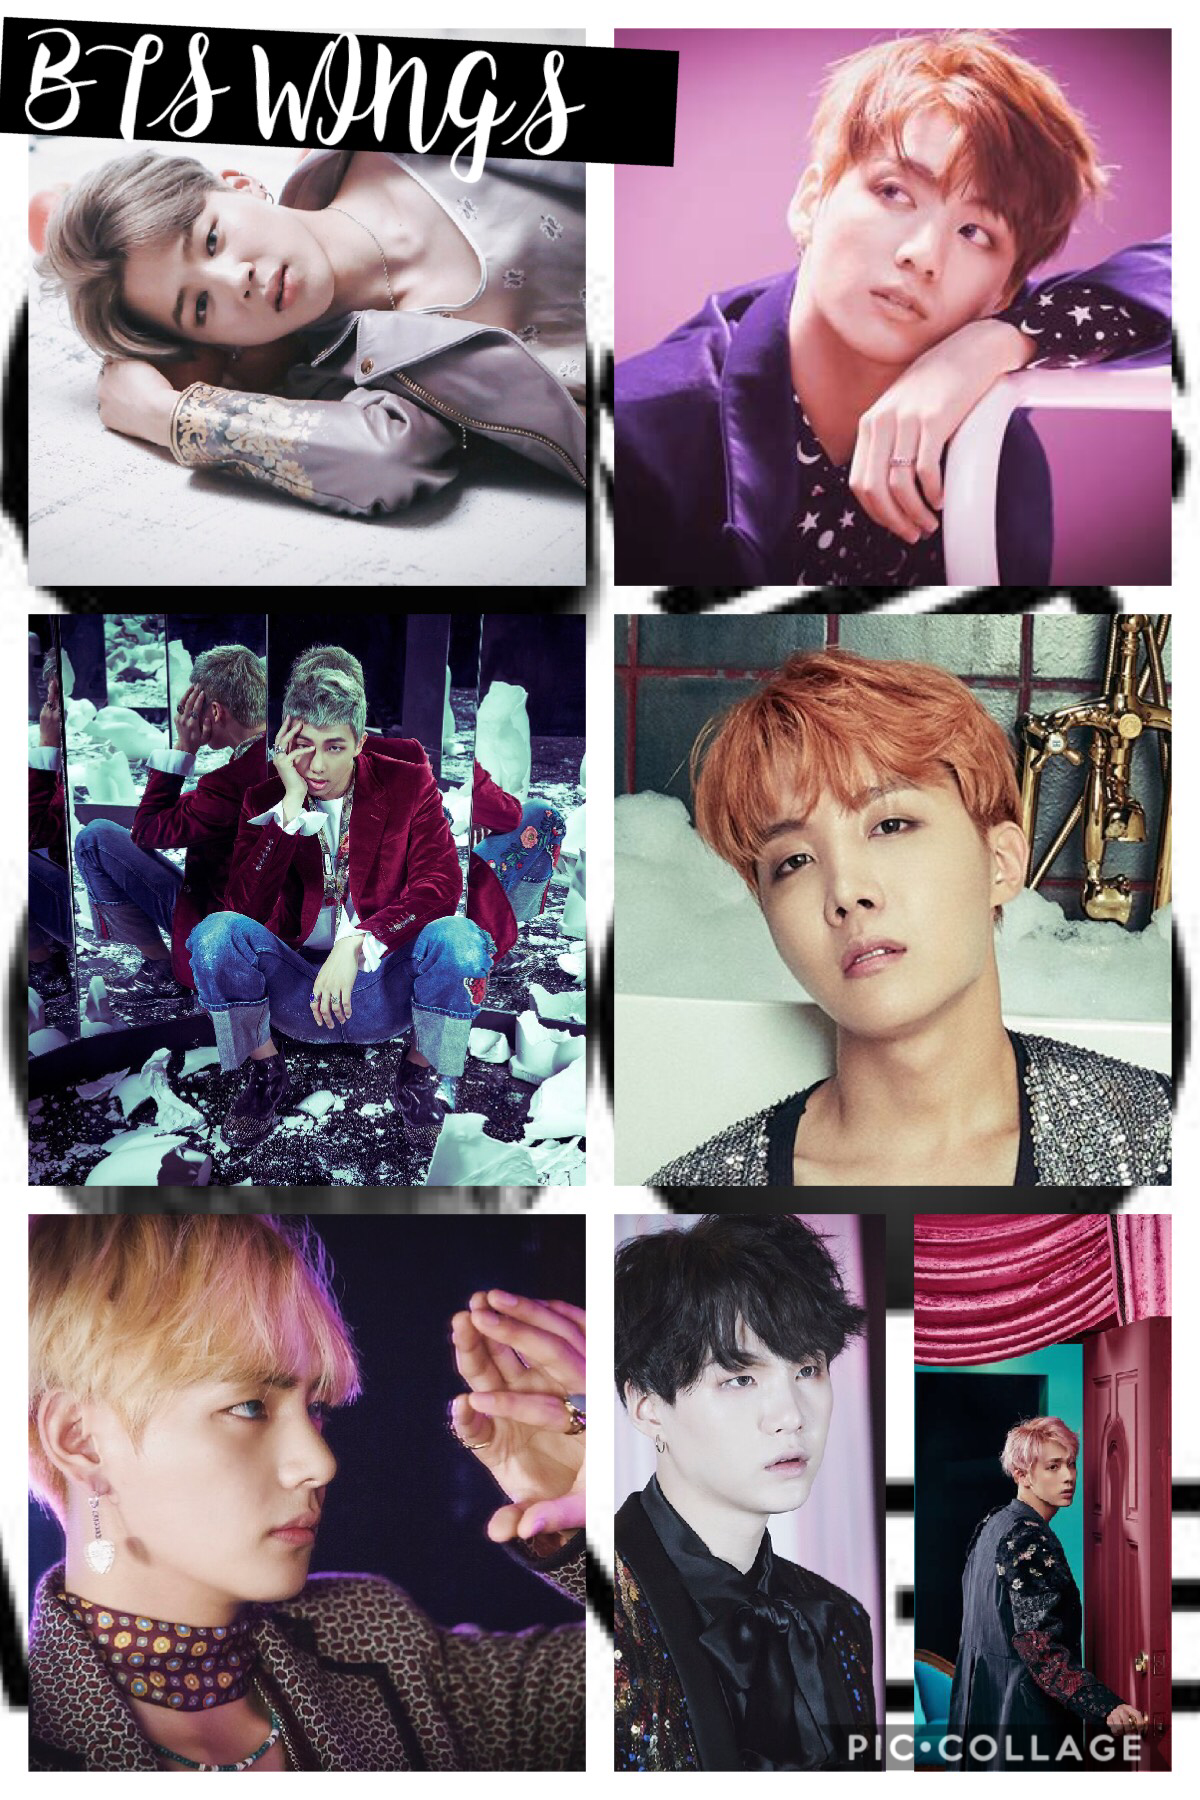 Hello again :3! This is me Camilita and I’m back again posting a BTS wallpaper (bc I love them) and I know there is some haters over there (out there) but don’t worry A.R.M.Ys I’m going to bring......A MIC DROP EDITION:D *no one proud* -_- HEY I’M TRYING 